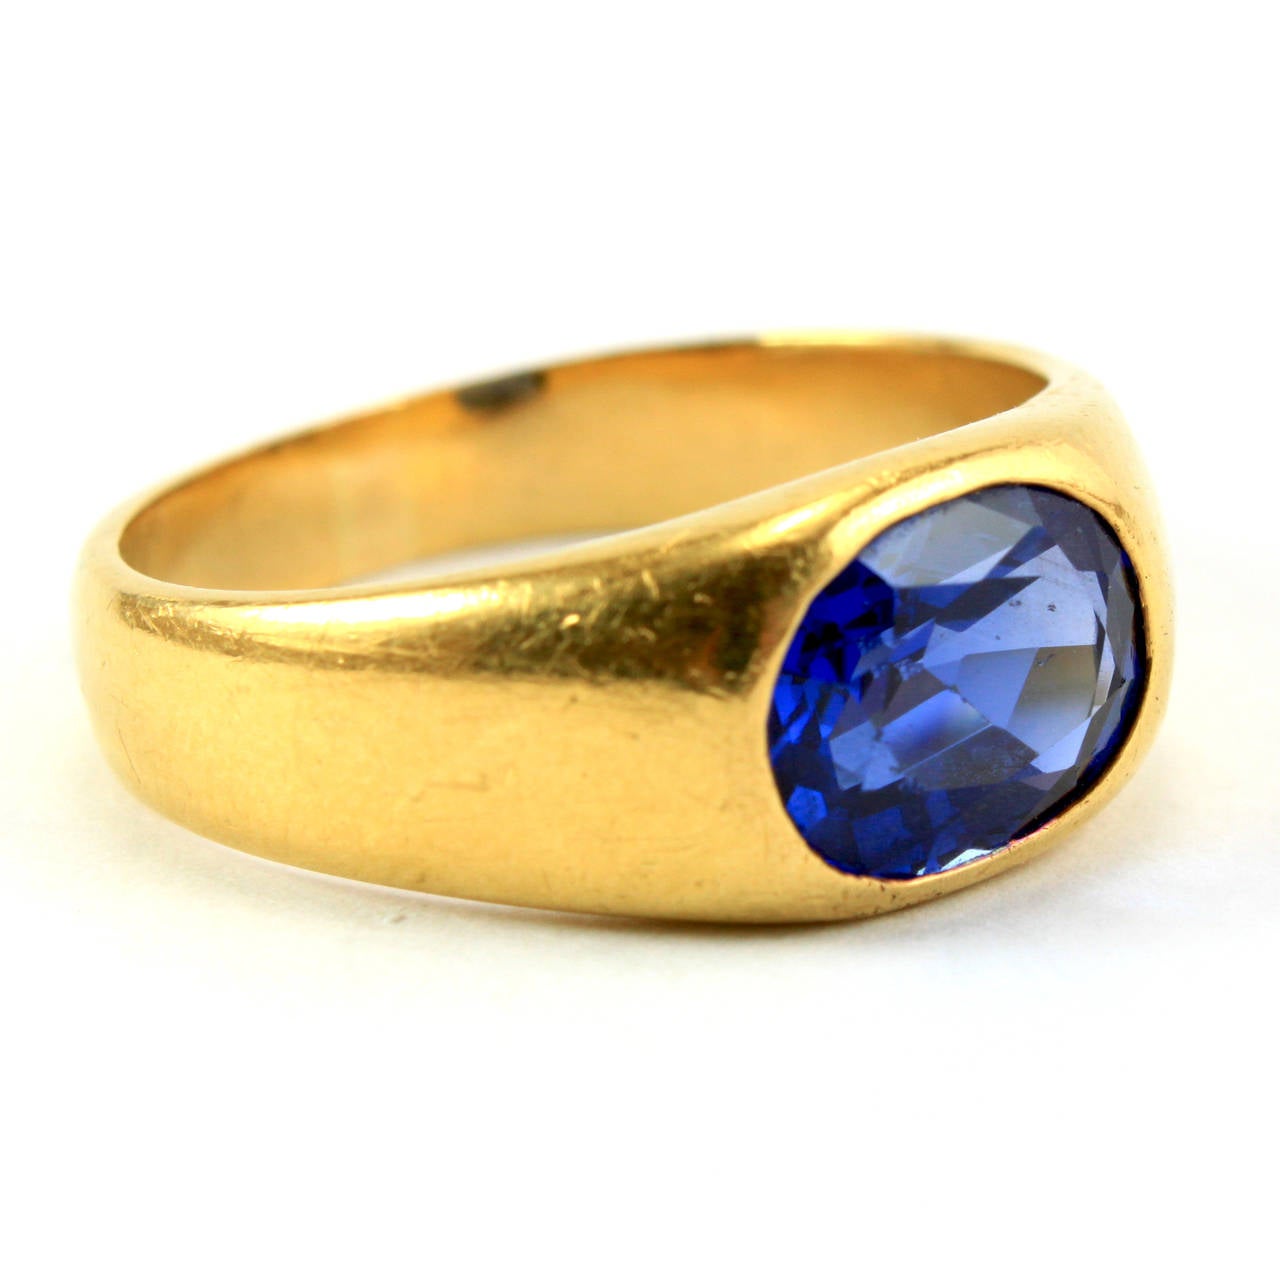 Men's 3.5 Carat Natural Sapphire Gold Gypsy Ring